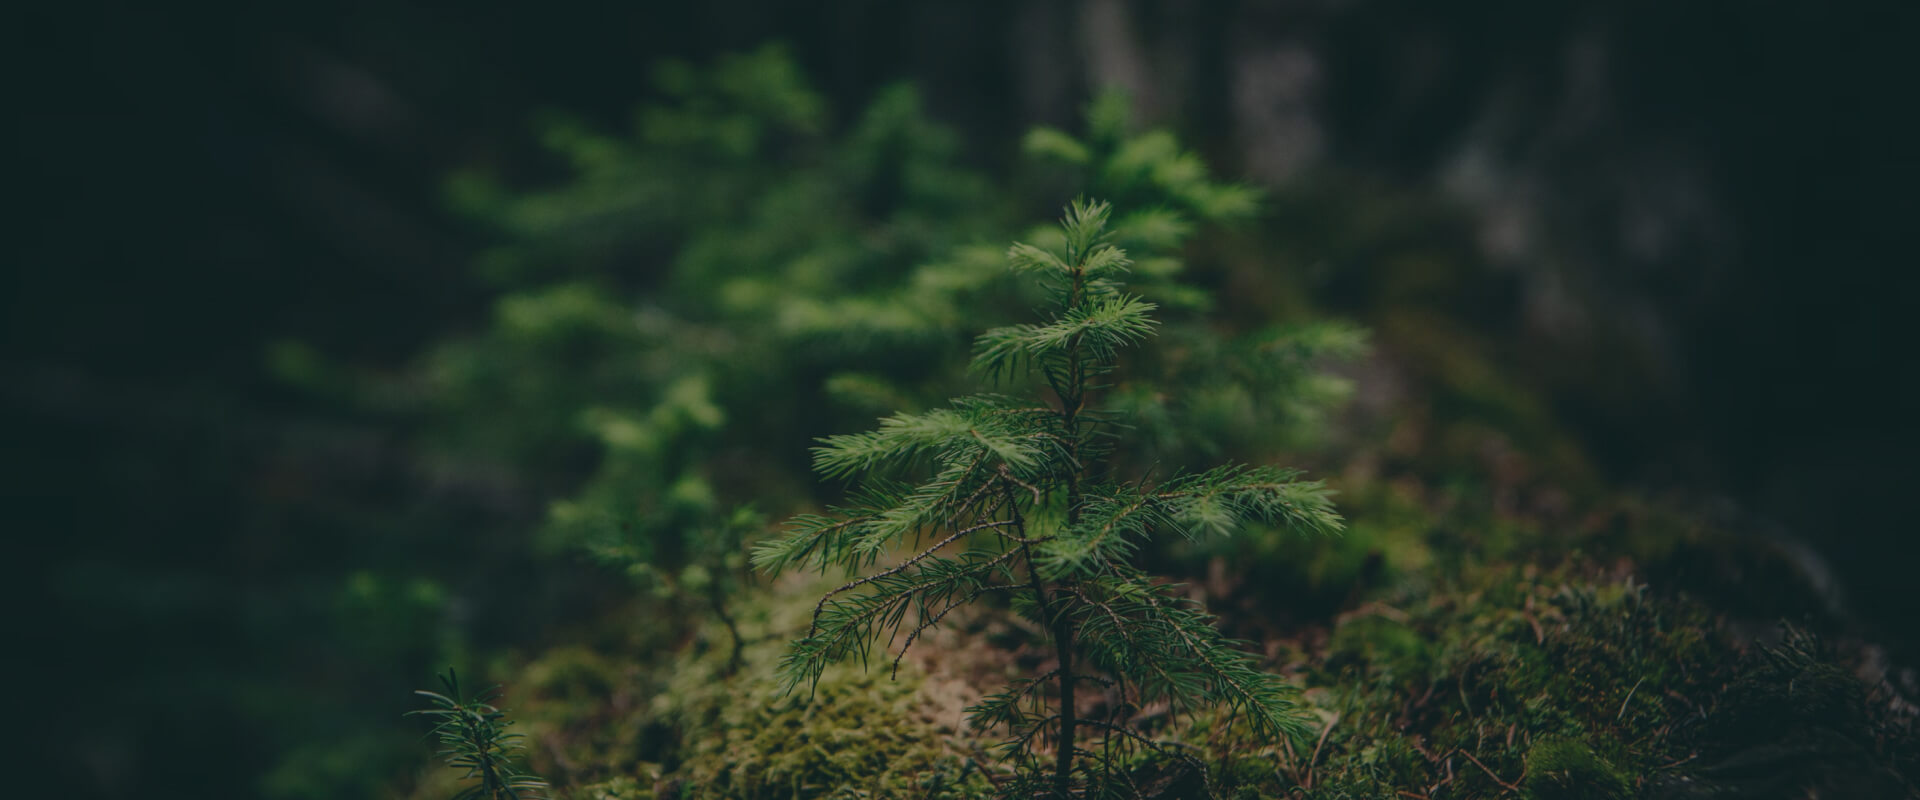 A small spruce in a forest